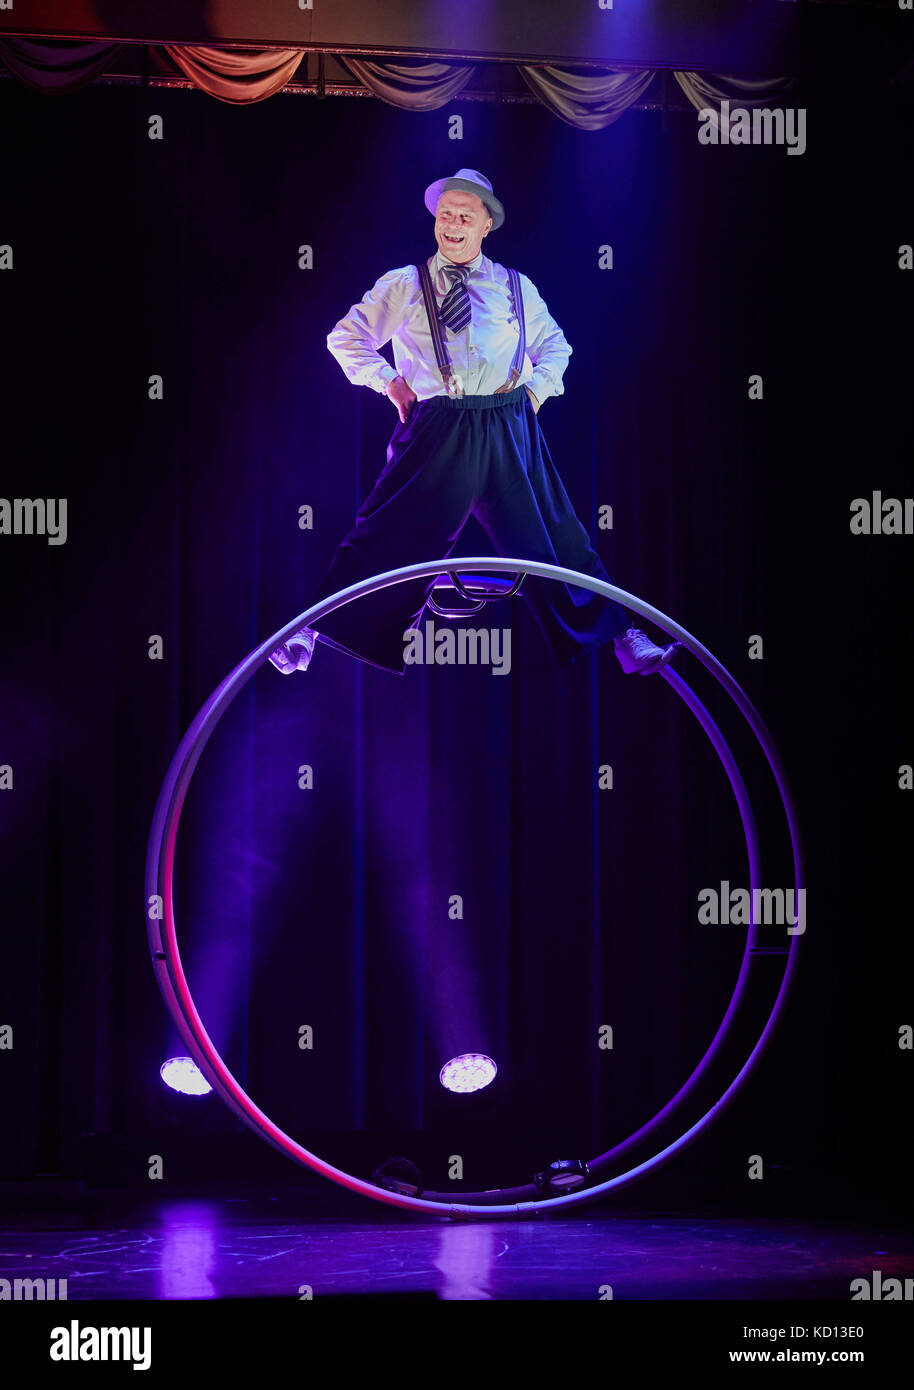 Hamburg, Germany. 08th Oct, 2017. Wheel gymnast Konstantin Muraviev performing onstage during a photo shoot on the occasion of new show times in the Hansa Theatre in Hamburg, Germany, 08 October 2017. The show's premiere will take place on 11 October 2017. Credit: Georg Wendt/dpa/Alamy Live News Stock Photo